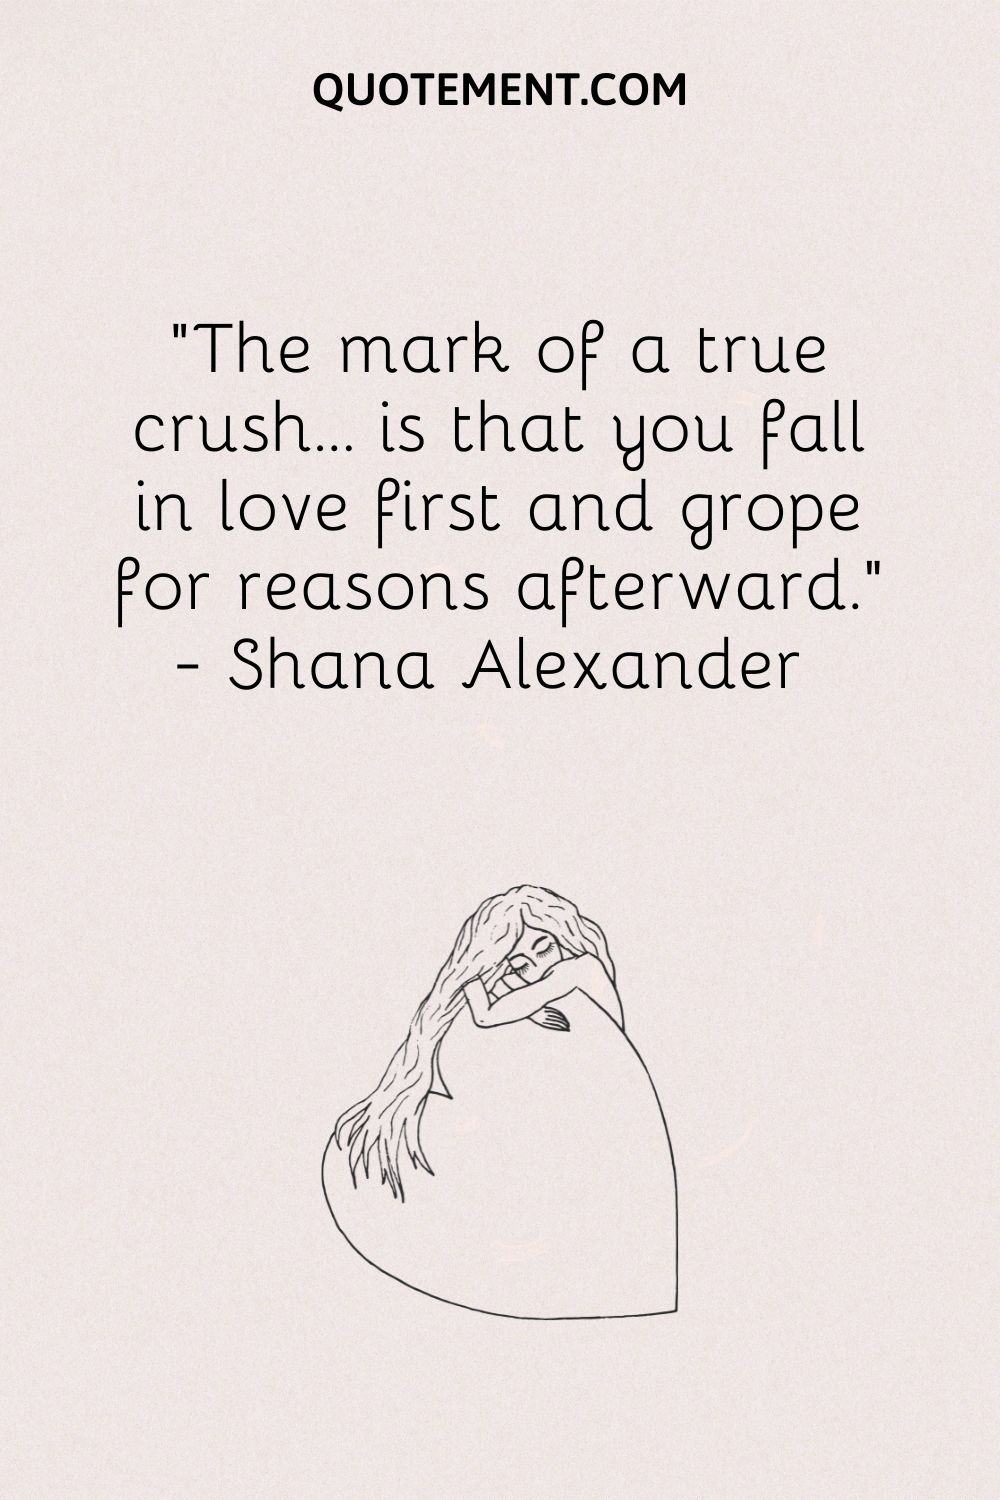 girl hugging a giant heart representing a secret crush quote
